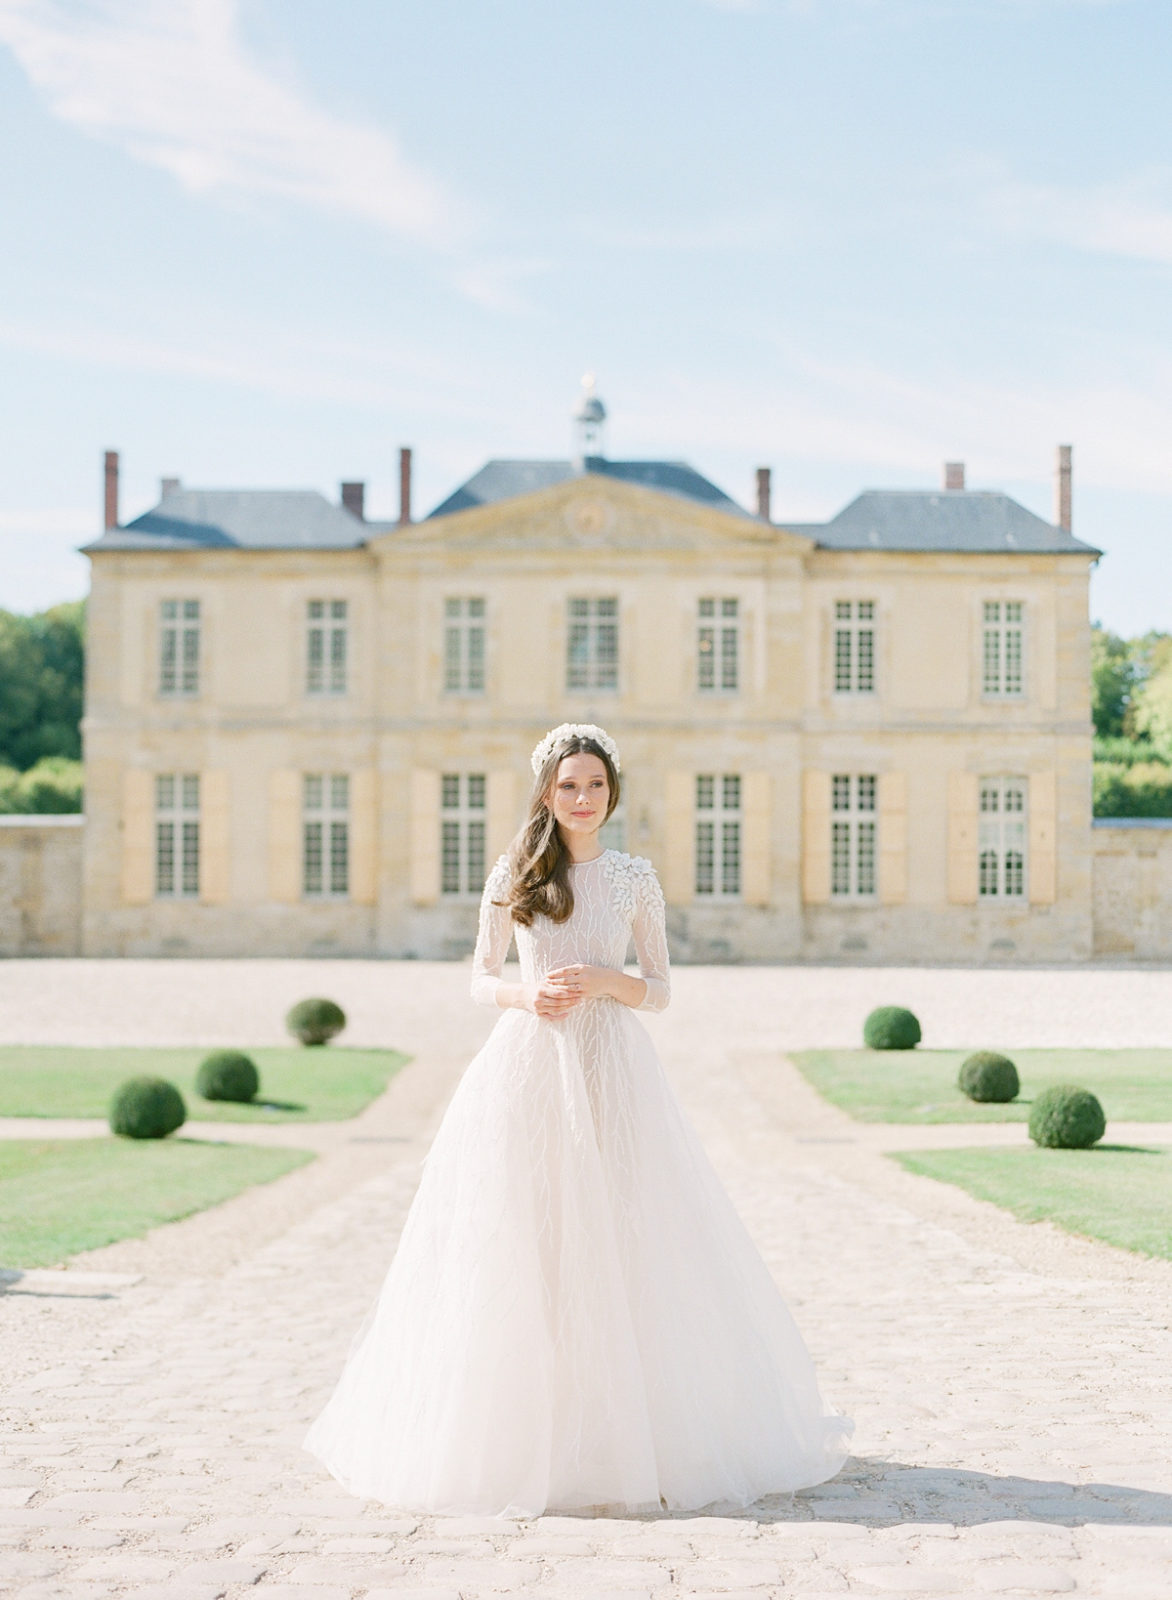 Best Wedding Dresses of 2019 | Luxury Wedding Gowns for the Fine Art Bride | Destination Wedding | Molly Carr Photography